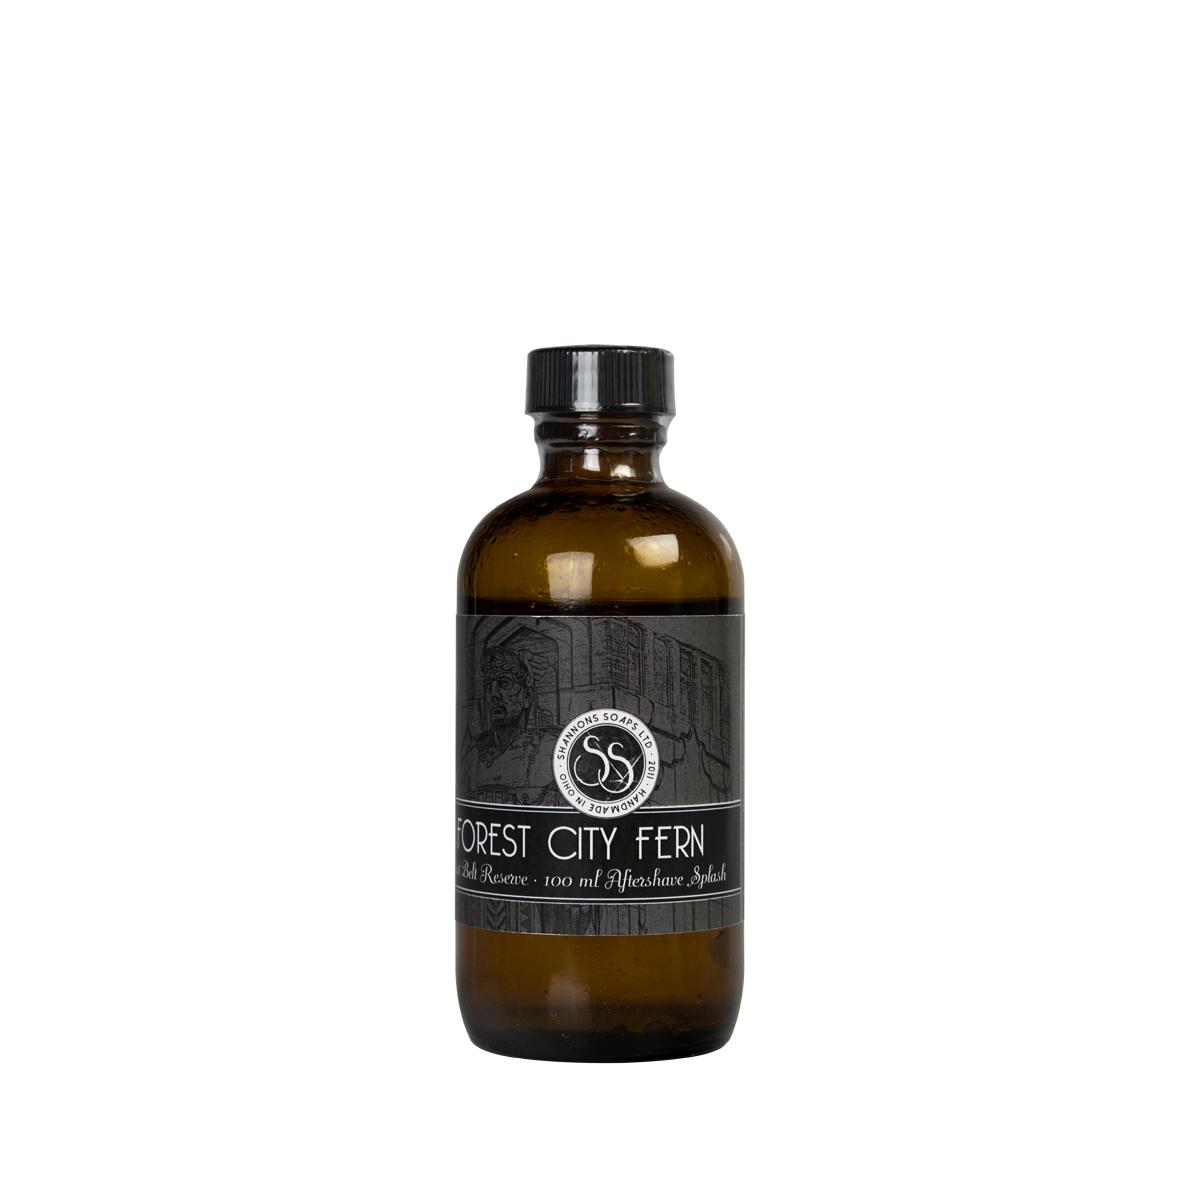 Primary image of Forest City Fern Aftershave